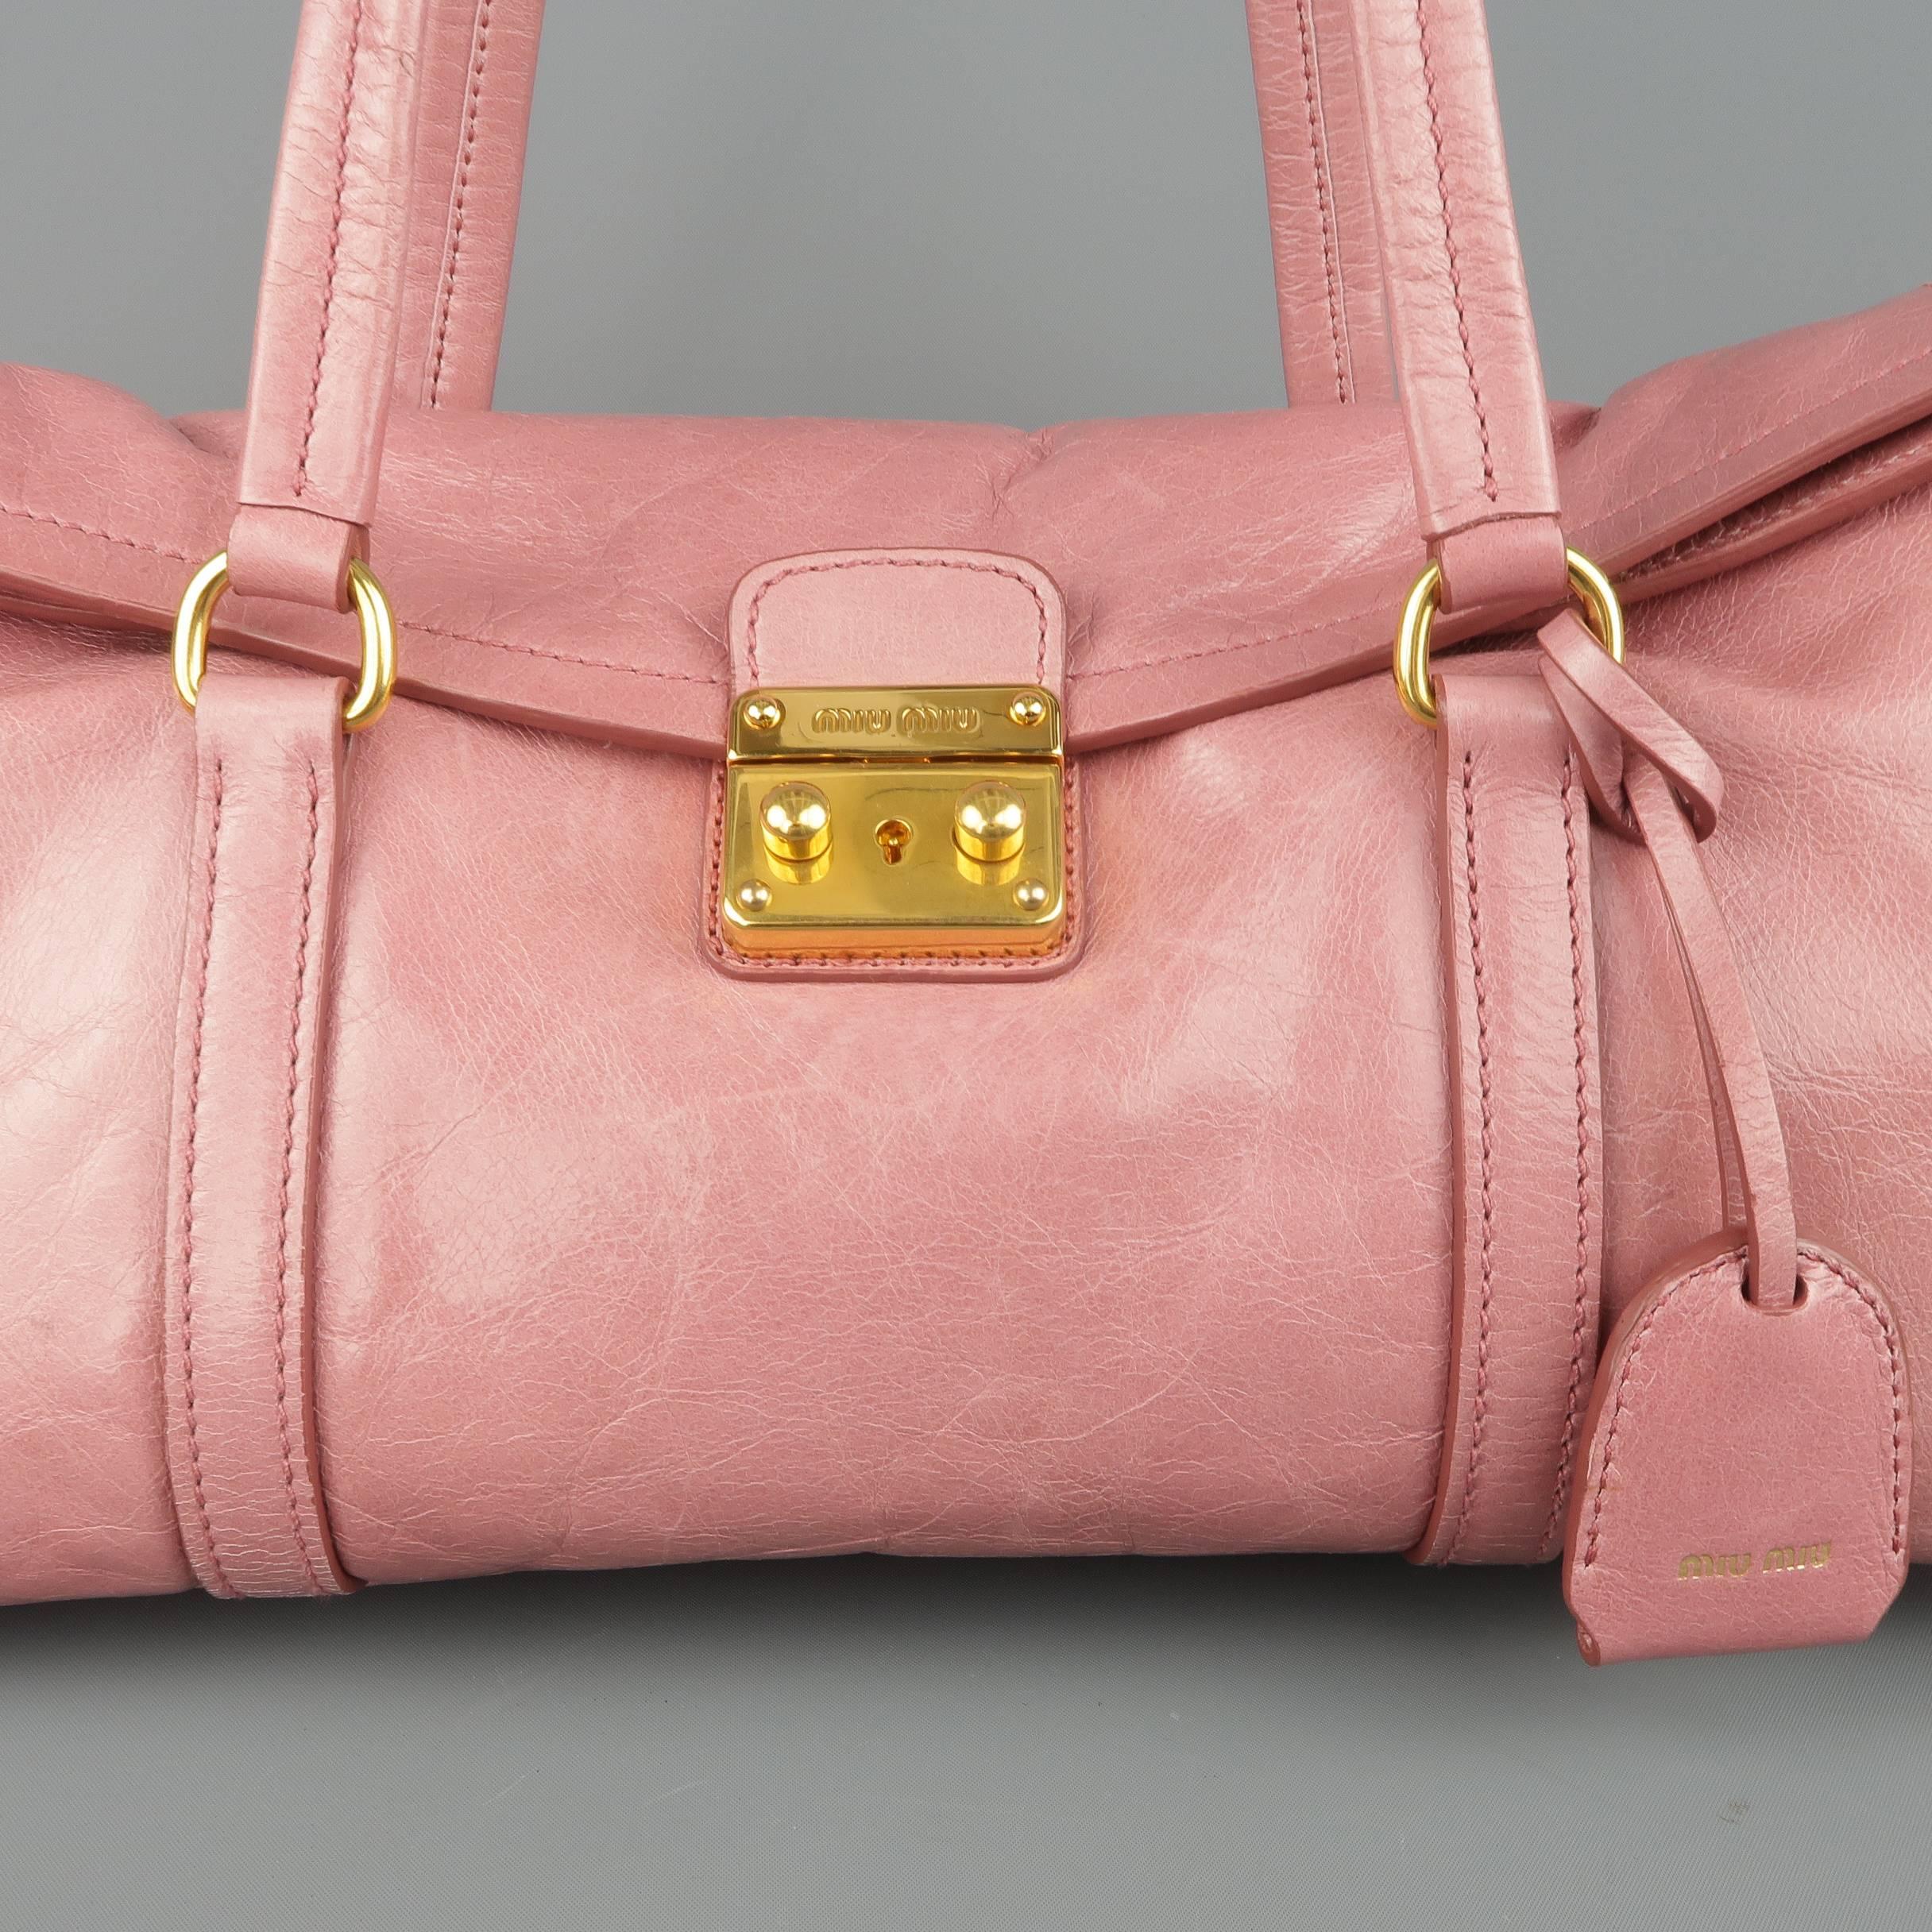 MIU MIU shoulder bag comes in a rose pink textured leather and features a top flap with snaps, gold tone faux lock closure, key clochette with hoop, back zipper, and burgundy lining. Made in Italy.
 
Excellent Pre-Owned Condition.
 
Measurements:
